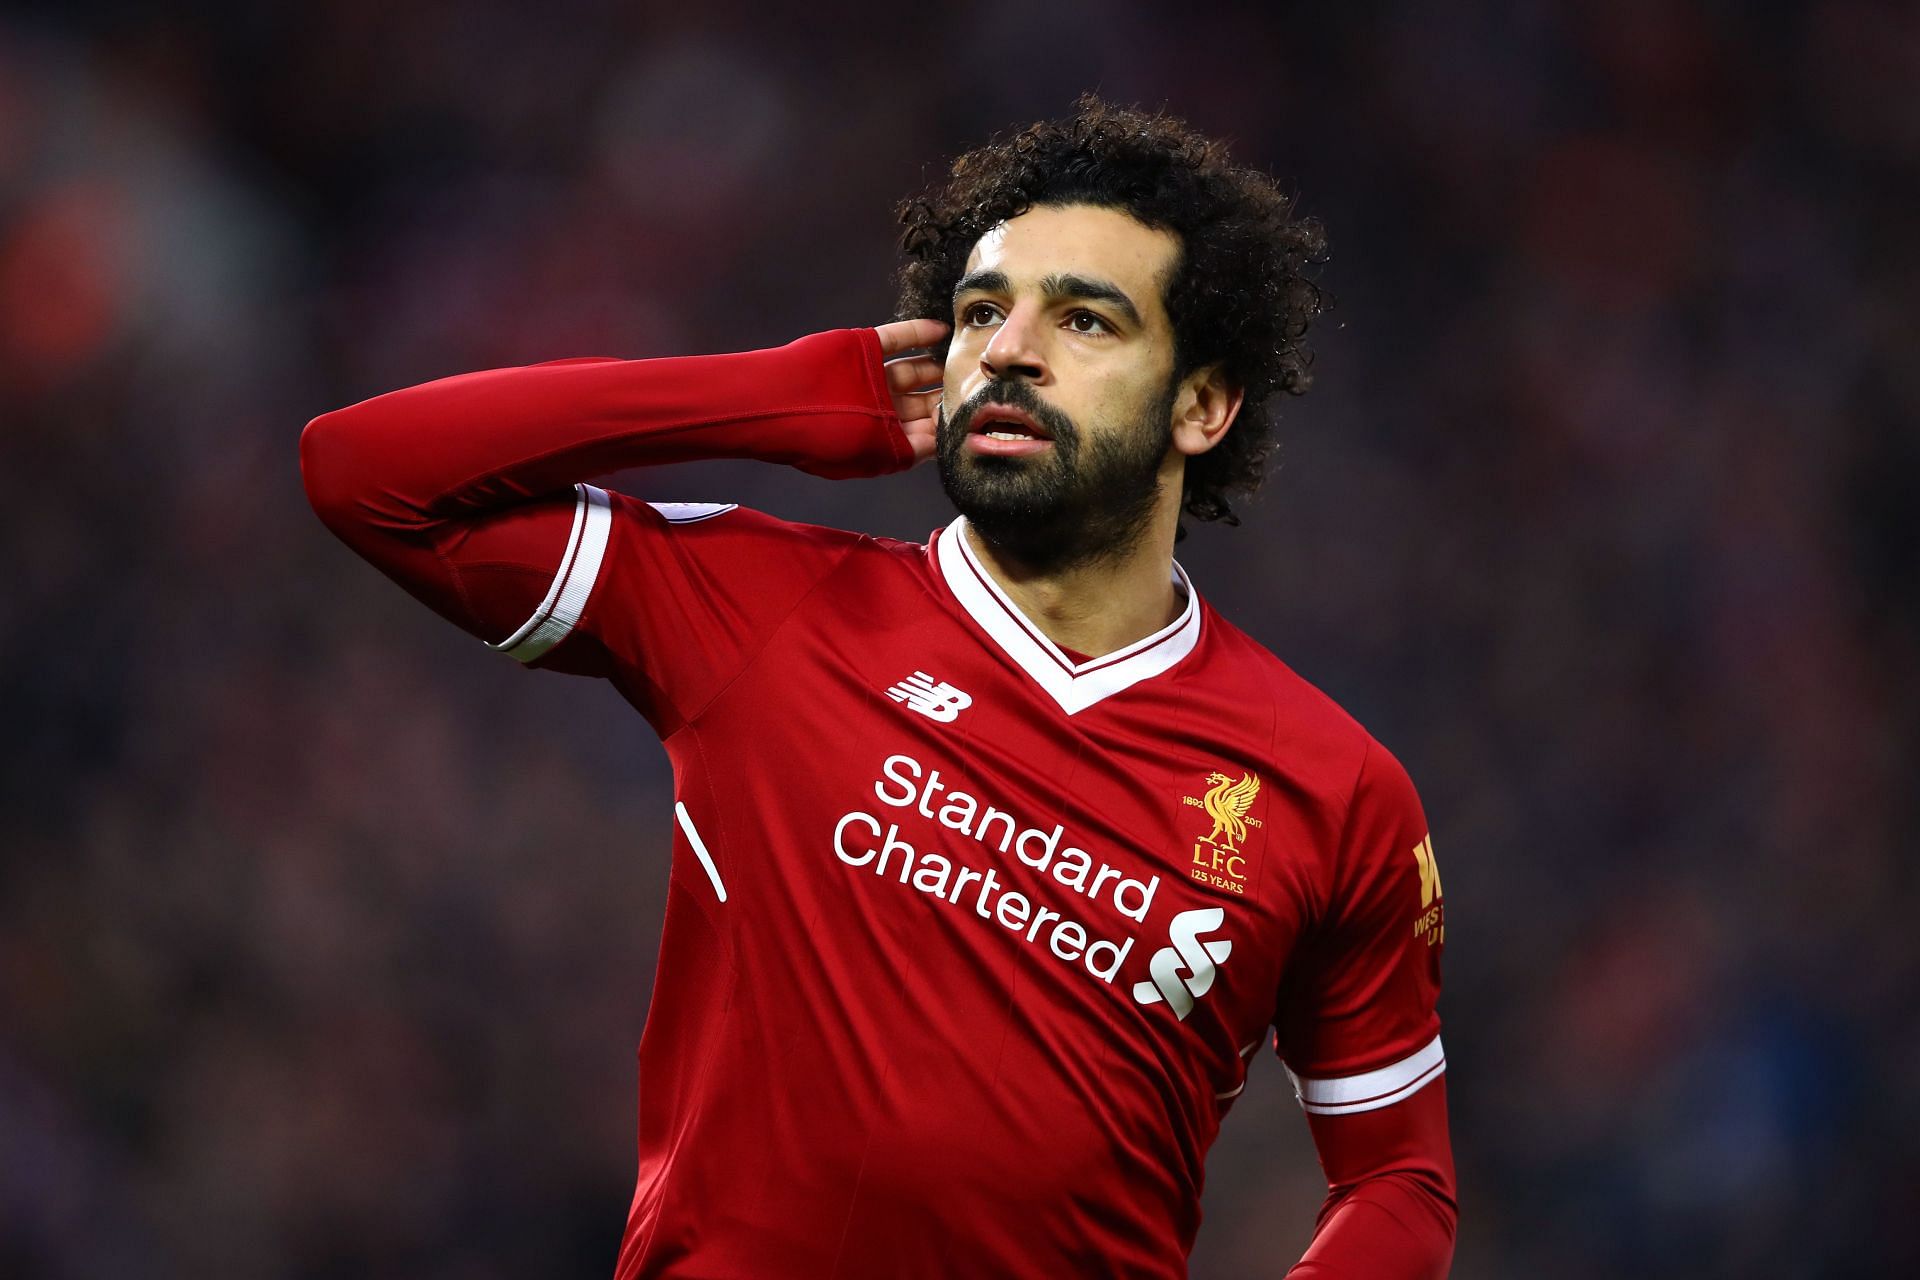 Will Salah move to Real Madrid?